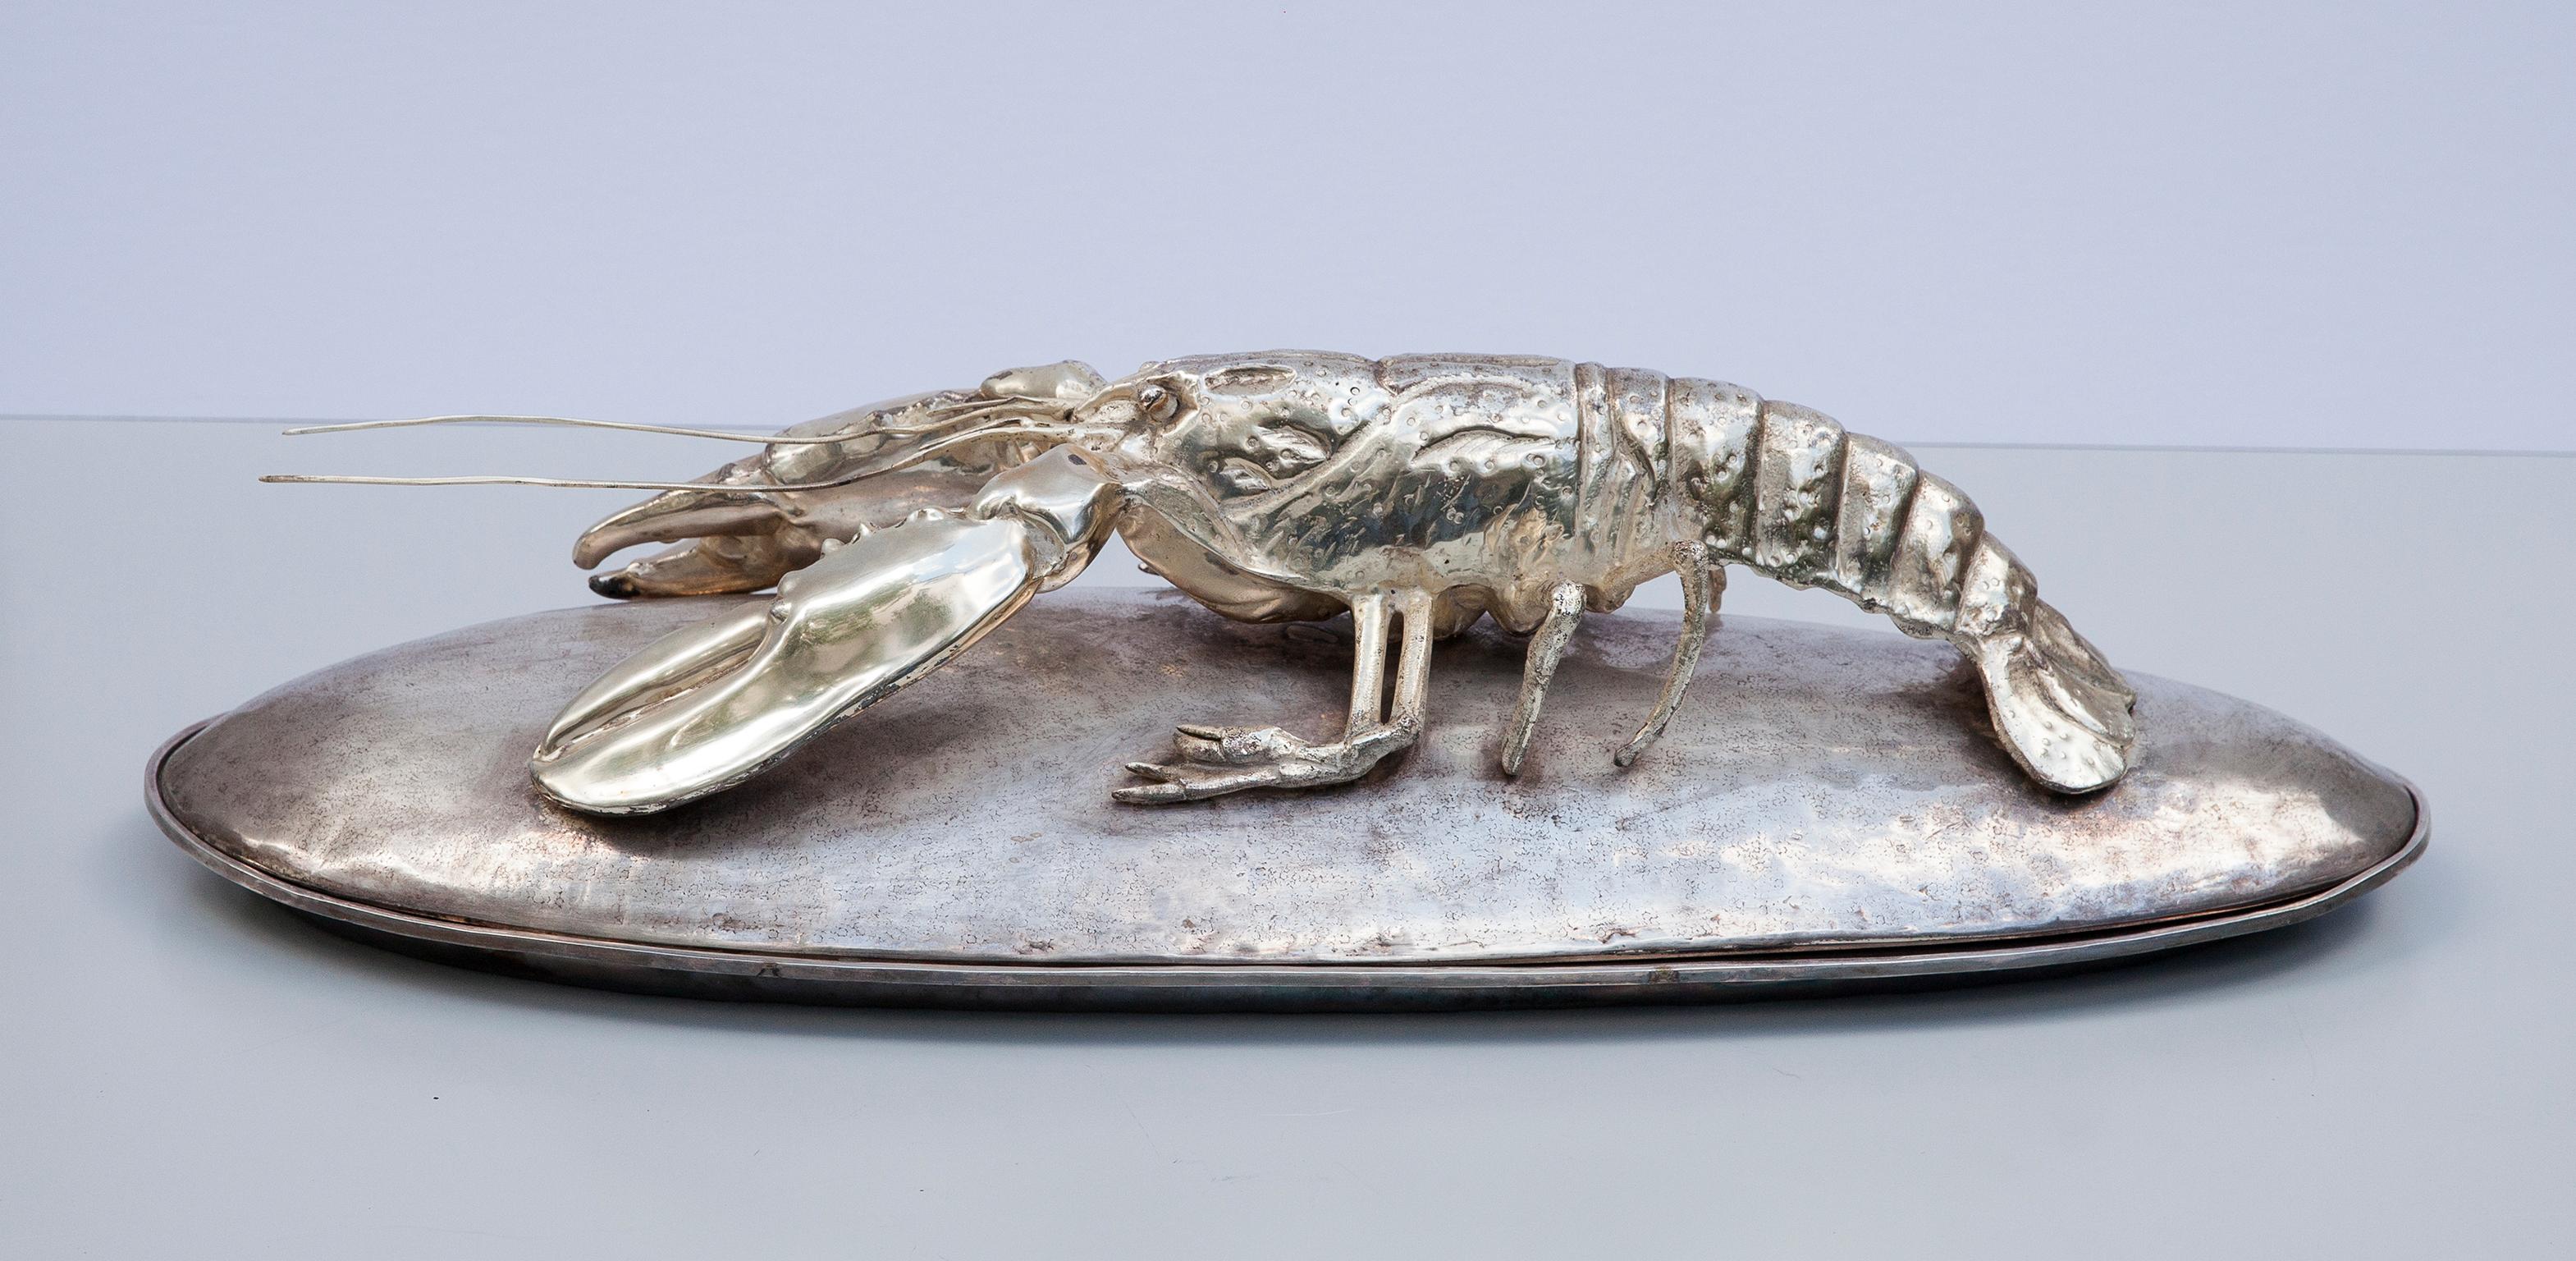 An impressive silver plated covered lobster serving platter by Franco Lapini, Italy, 1970. The large deep oval tray with wide hammered edge, fitted with a conforming hammered lid surmounted a life-like cast lobster, all silver plated on brass.